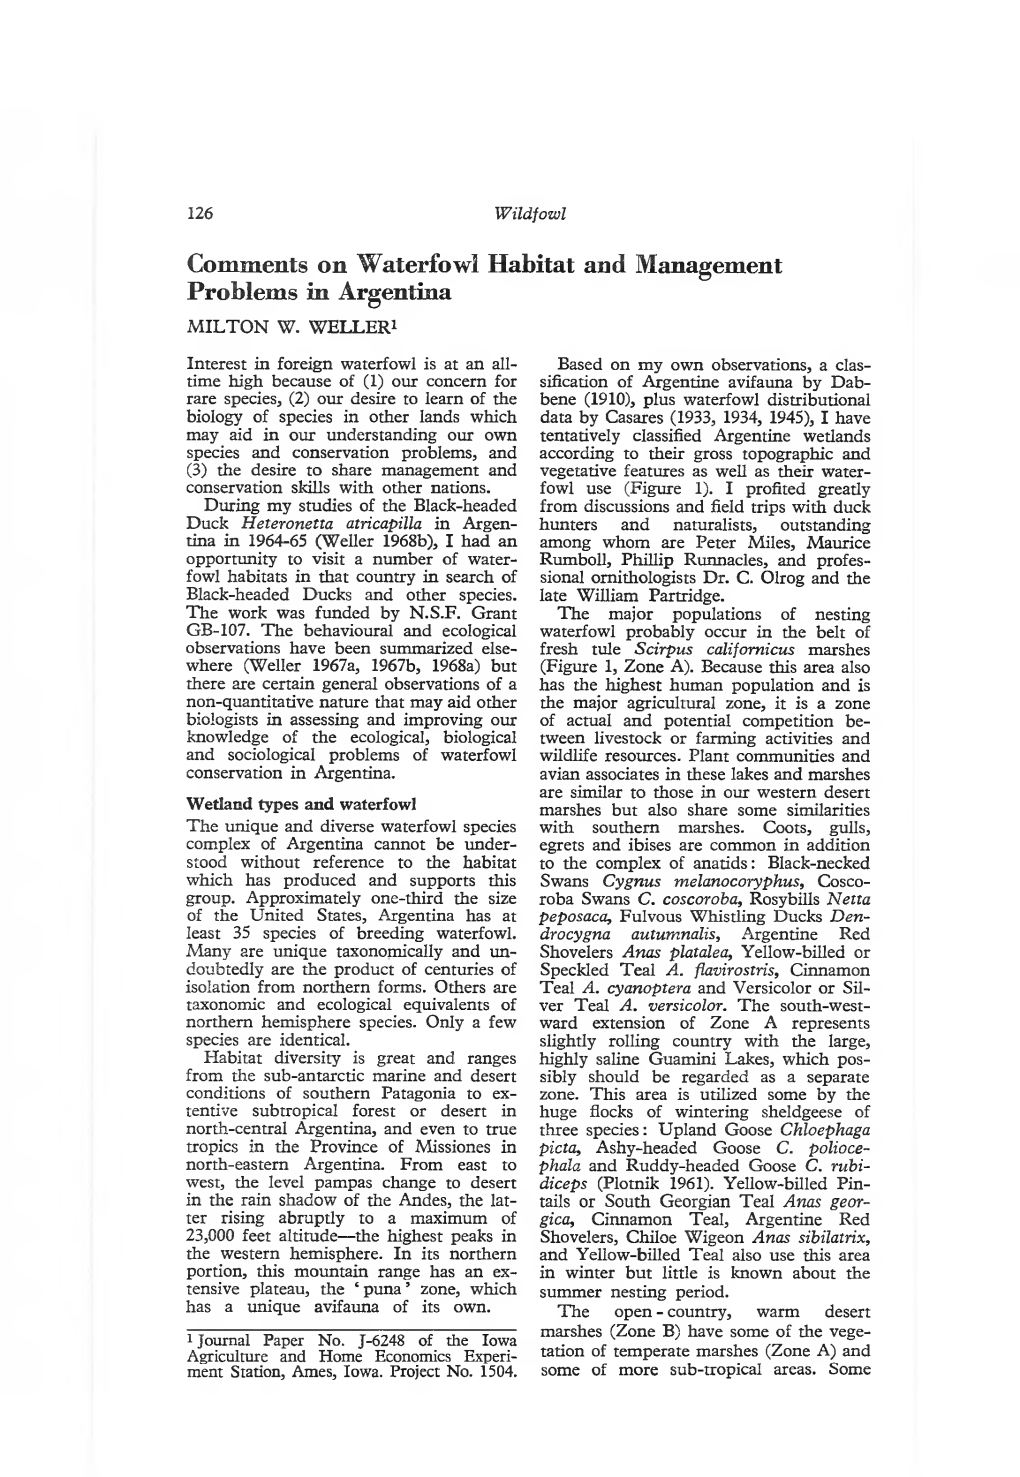 Comments on Waterfowl Habitat and Management Problems in Argentina